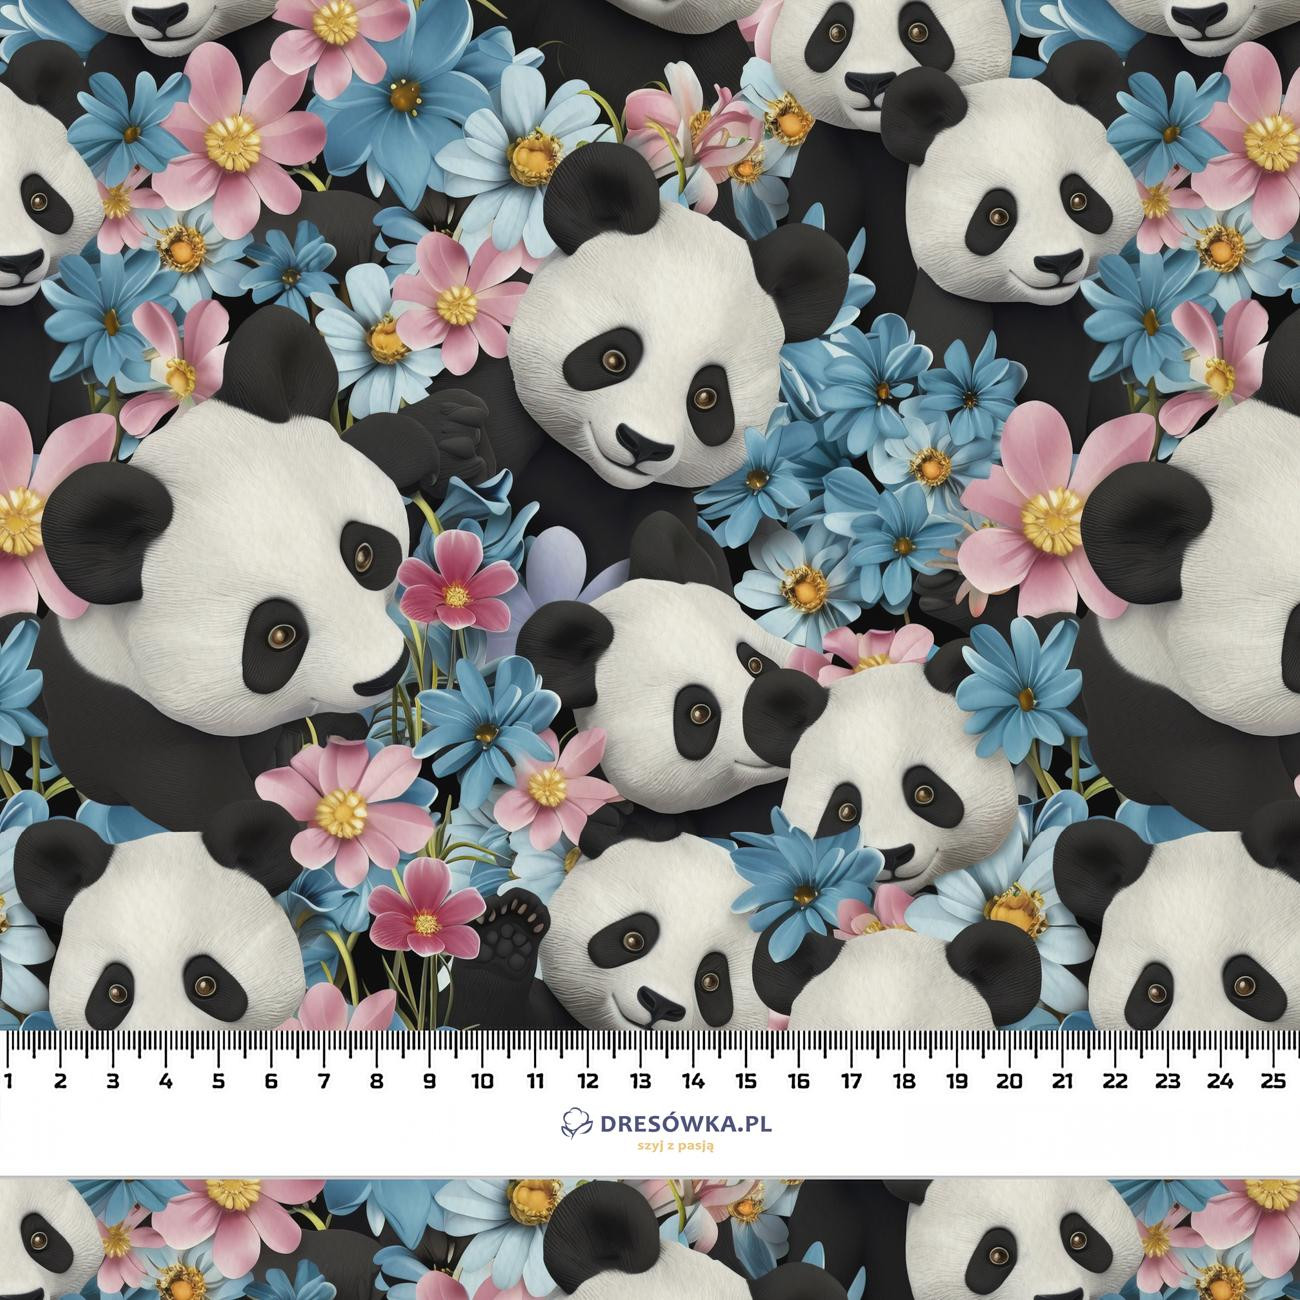 PANDY / FLOWERS PAT. 4 - quick-drying woven fabric